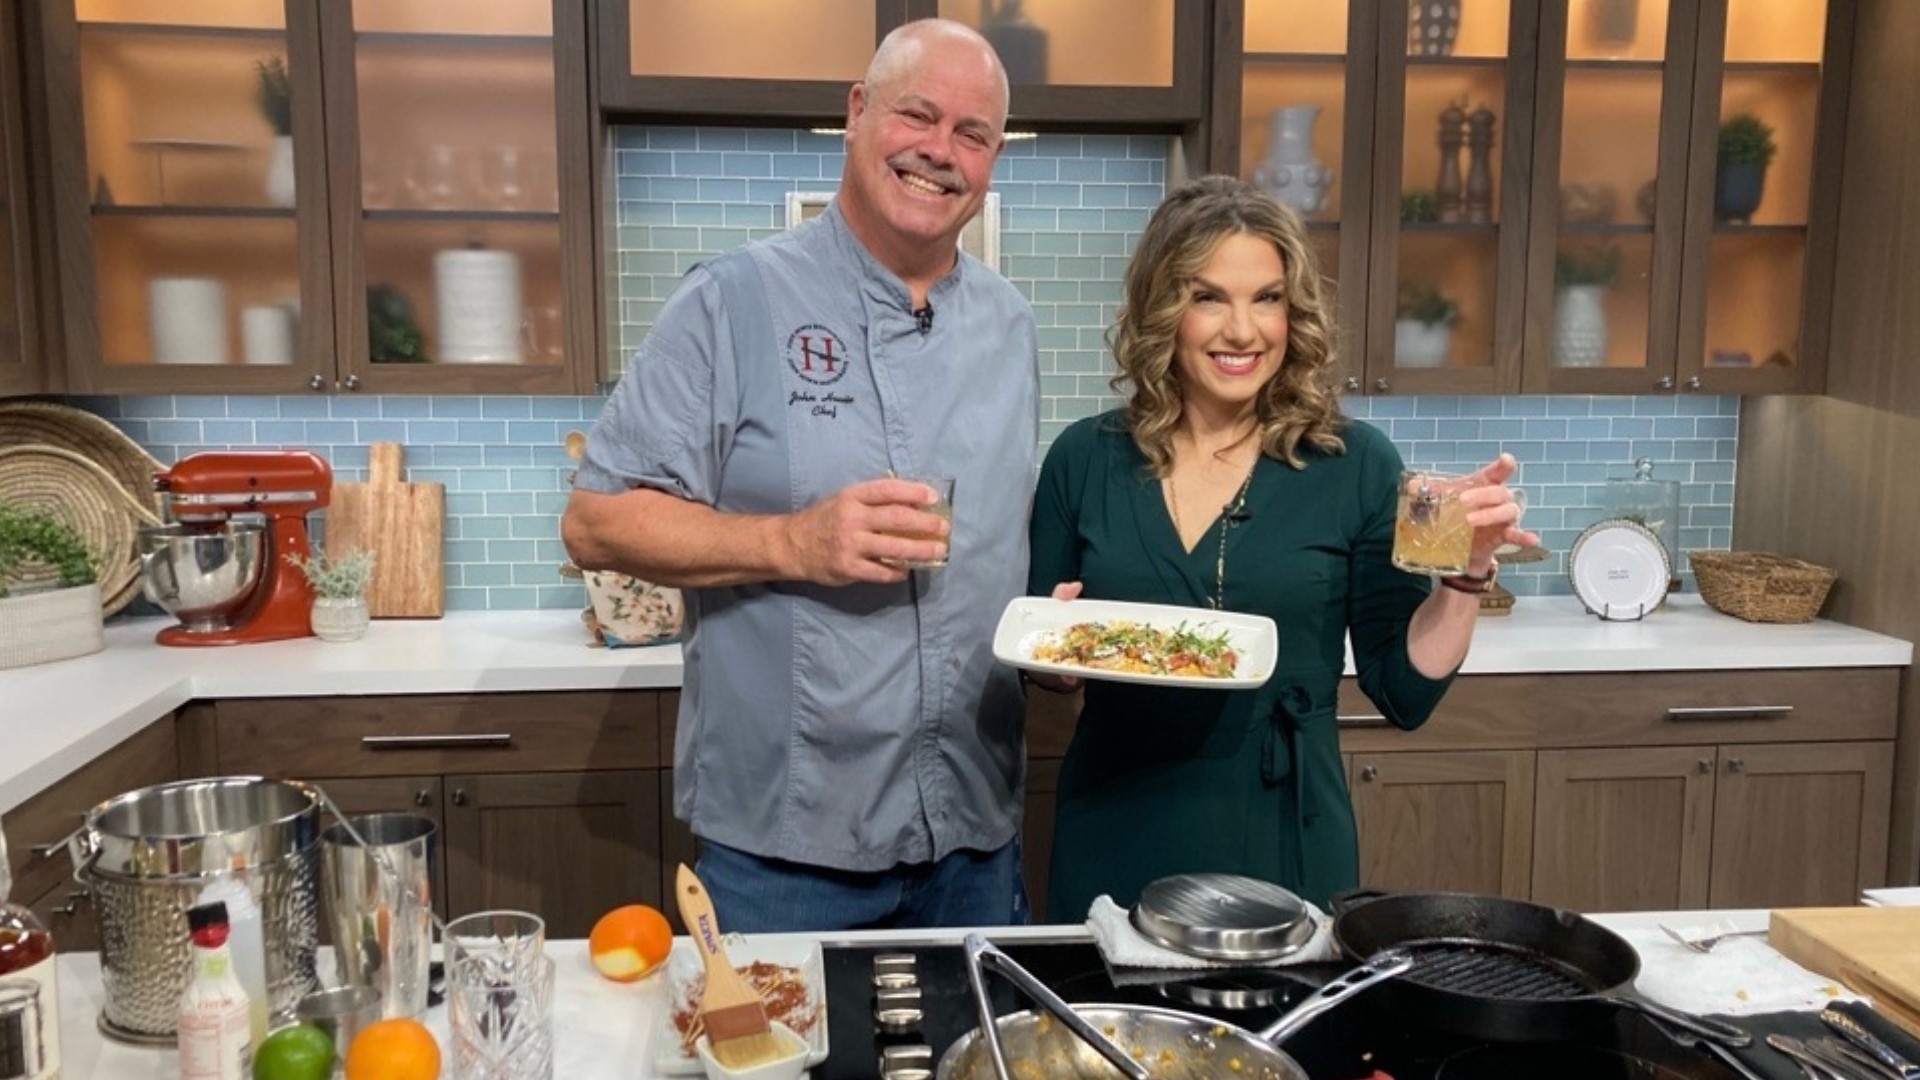 Chef John Howie pairs his Ancho Chili Shrimp with a cocktail from his new venture, Whiskey by John Howie. #newdaynw